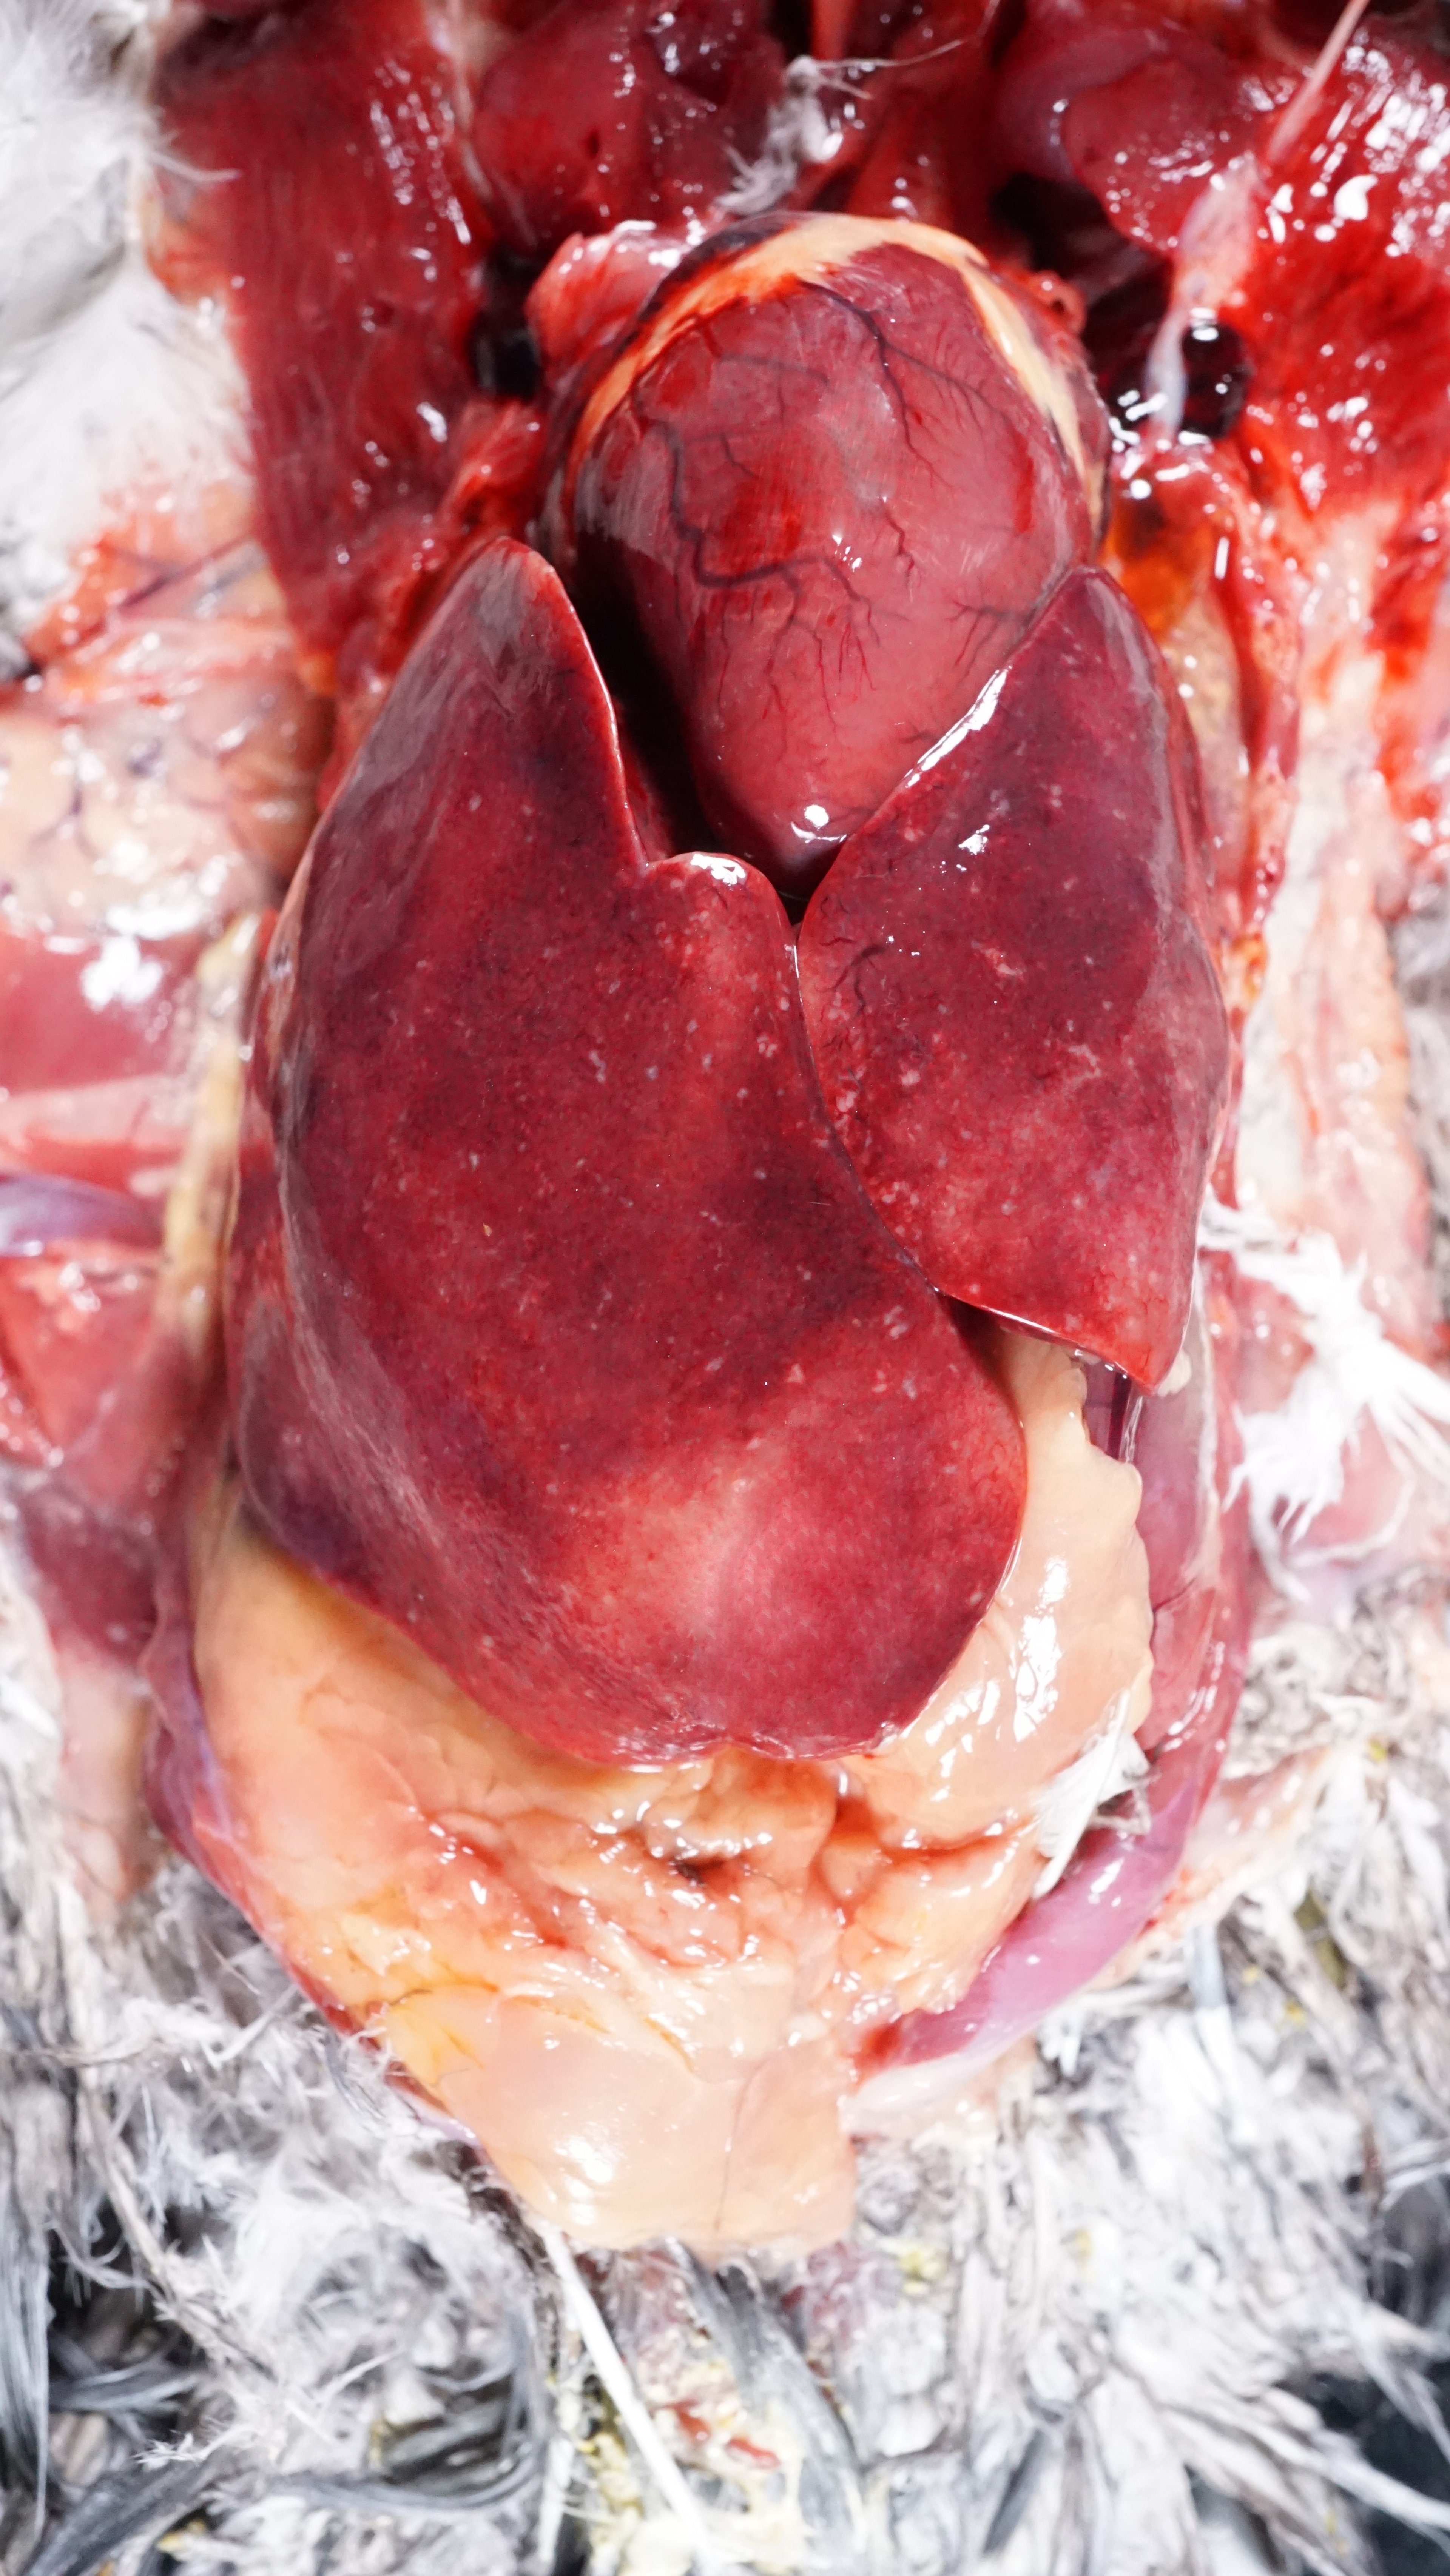 Paratyphoid infection, heart/liver, pigeon